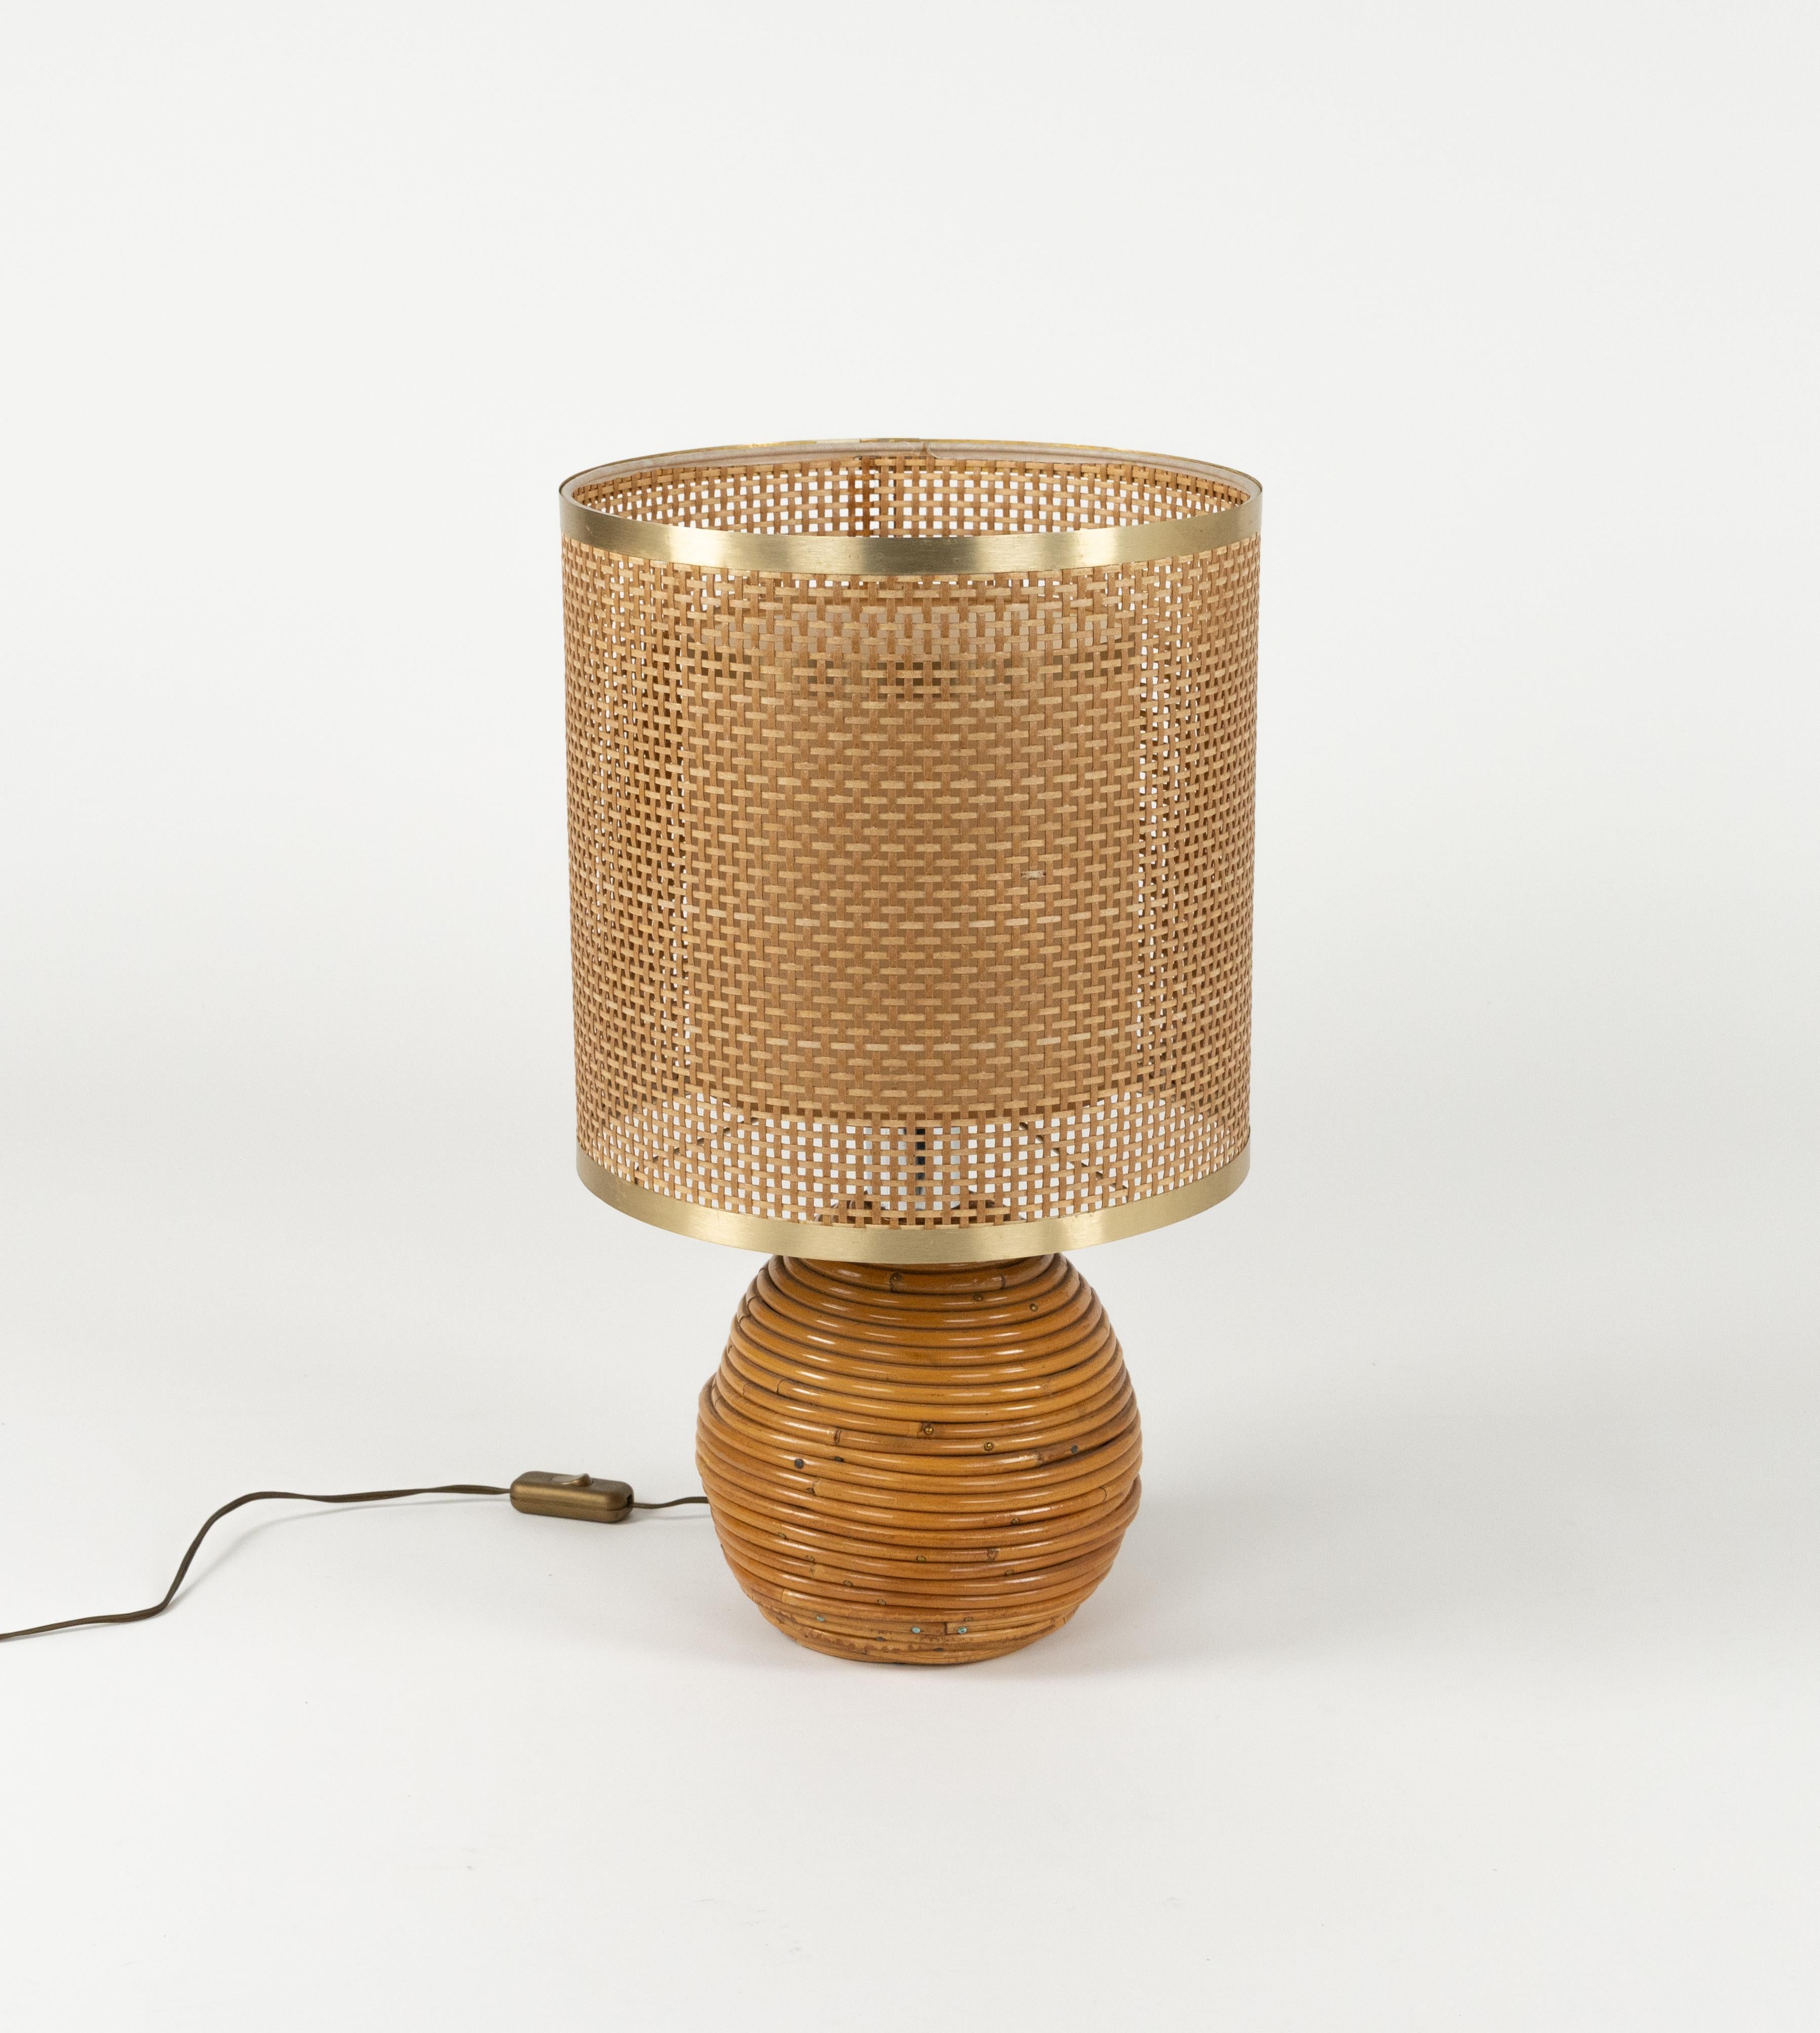 Mid-Century Modern Midcentury Rattan, Wicker and Chrome Table Lamp by Vivai Del Sud, Italy 1970s For Sale